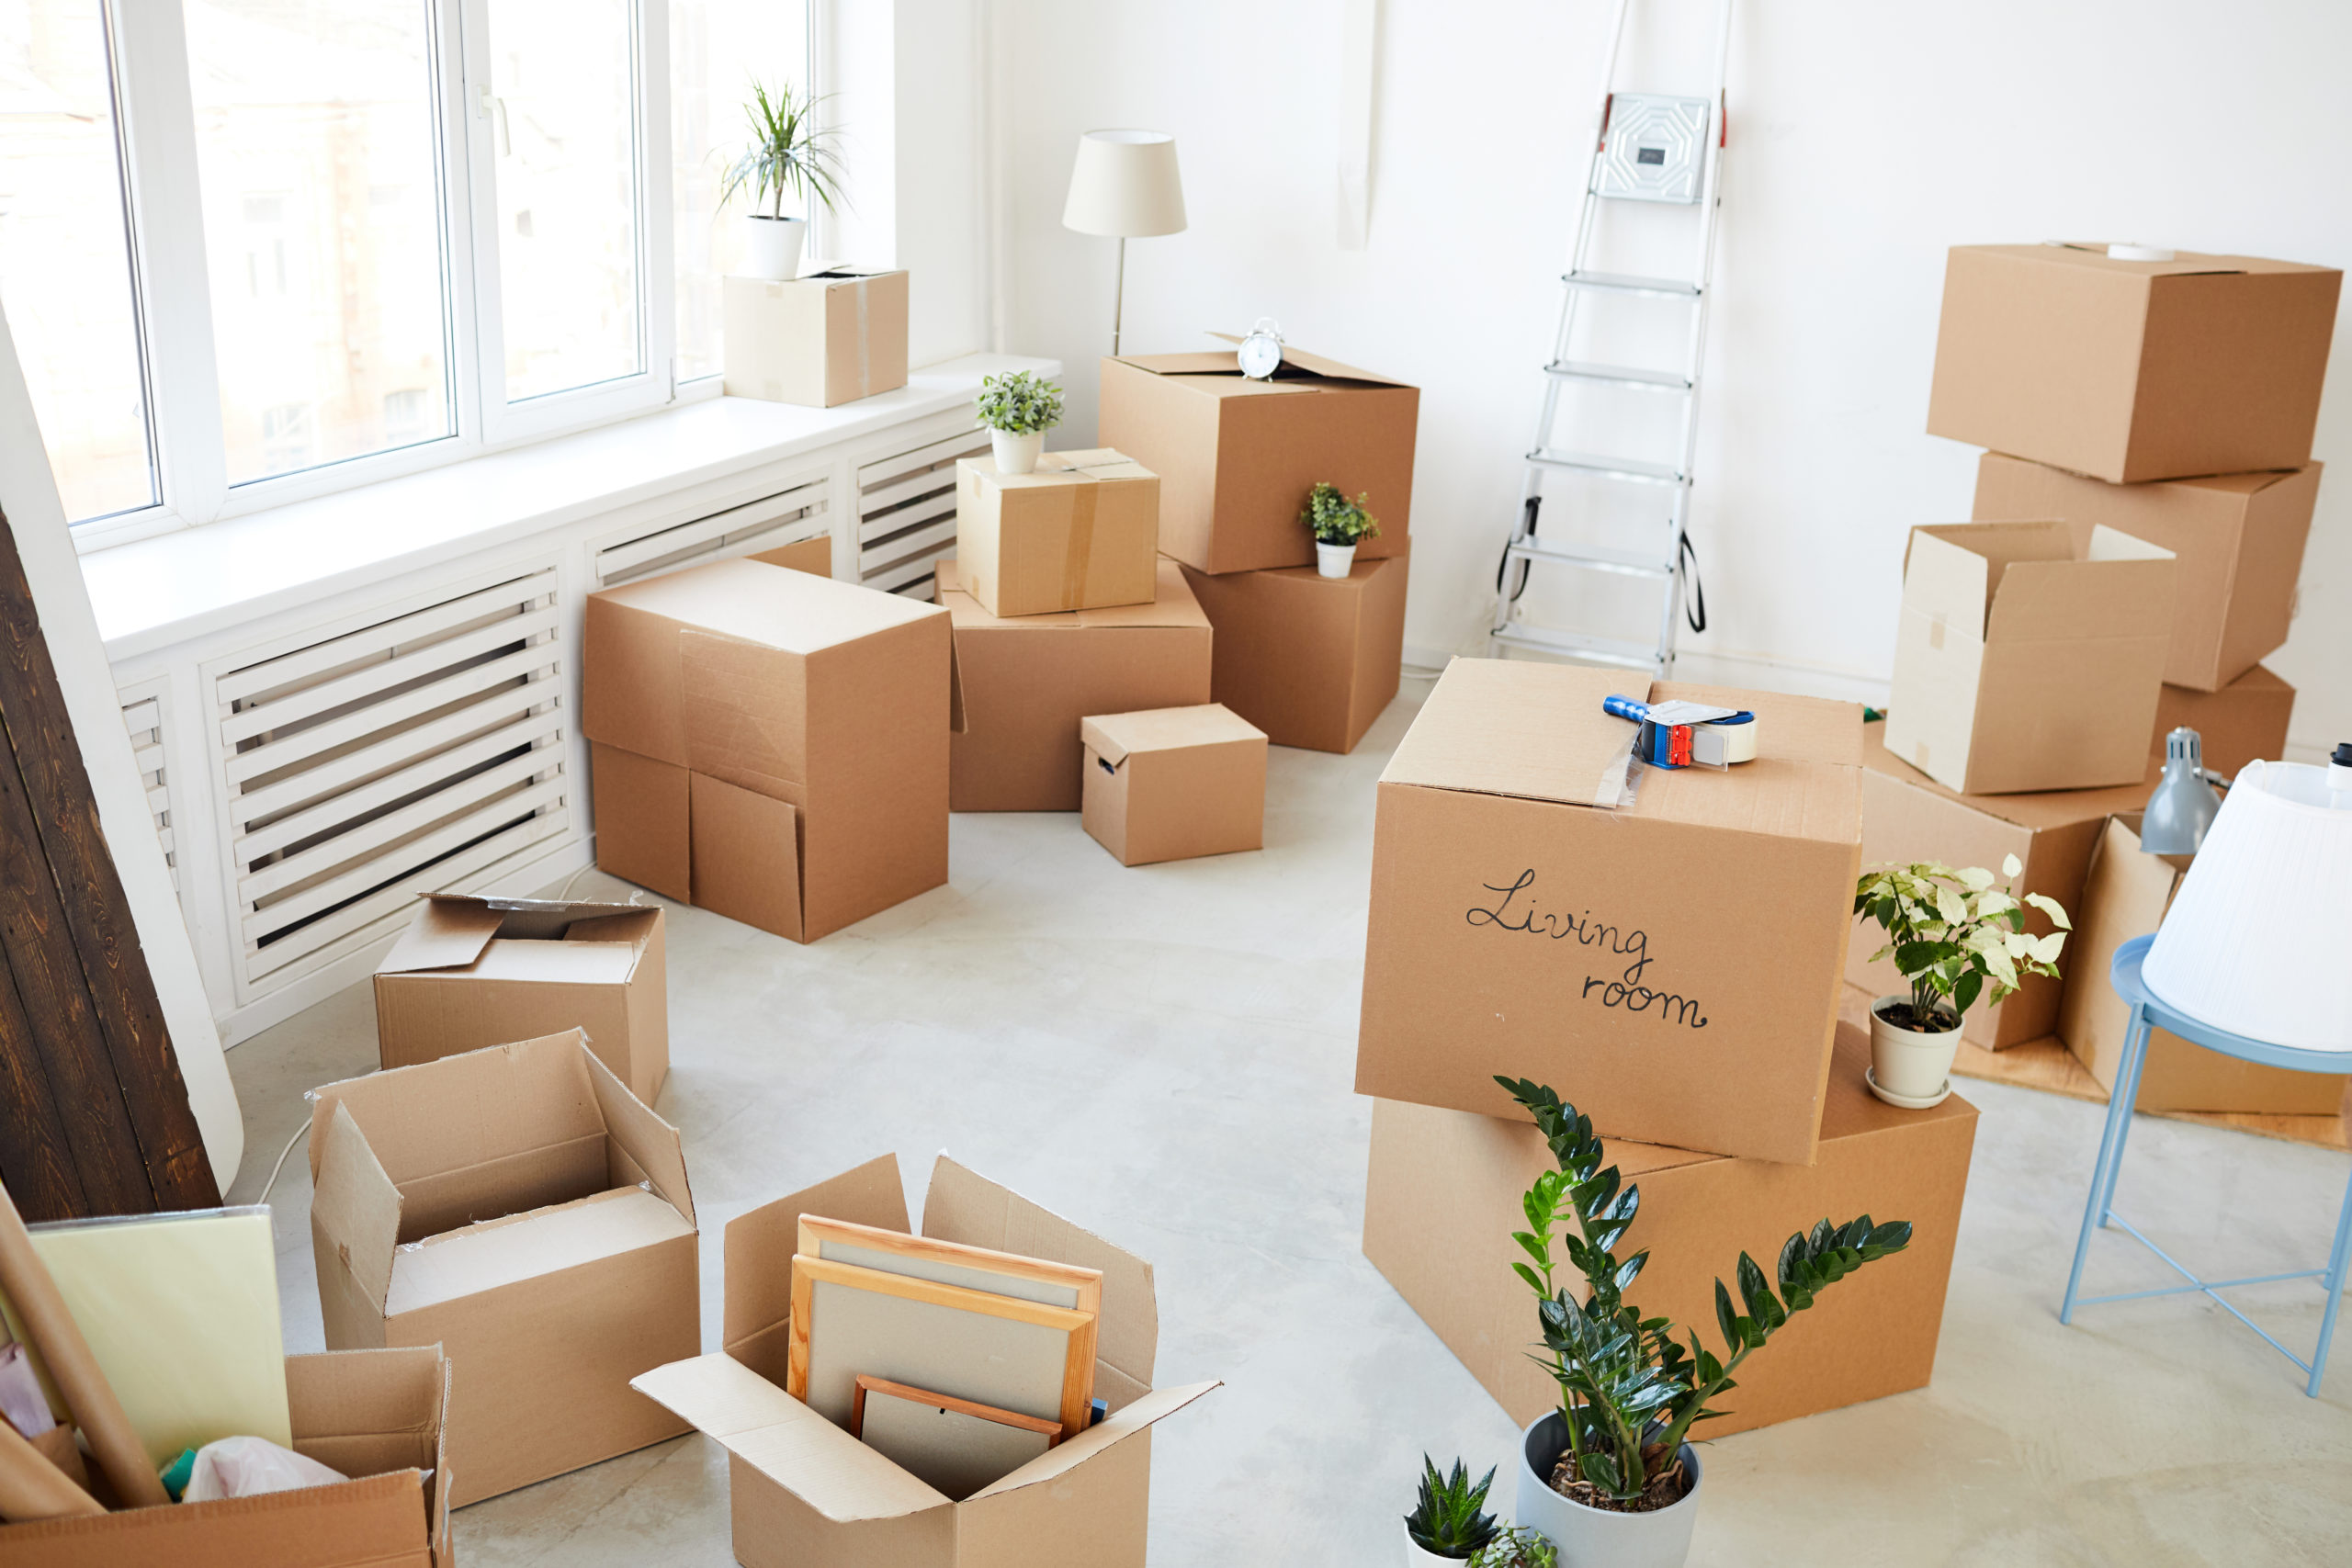 2021 Essentials You Need in Your Moving Day Survival Kit